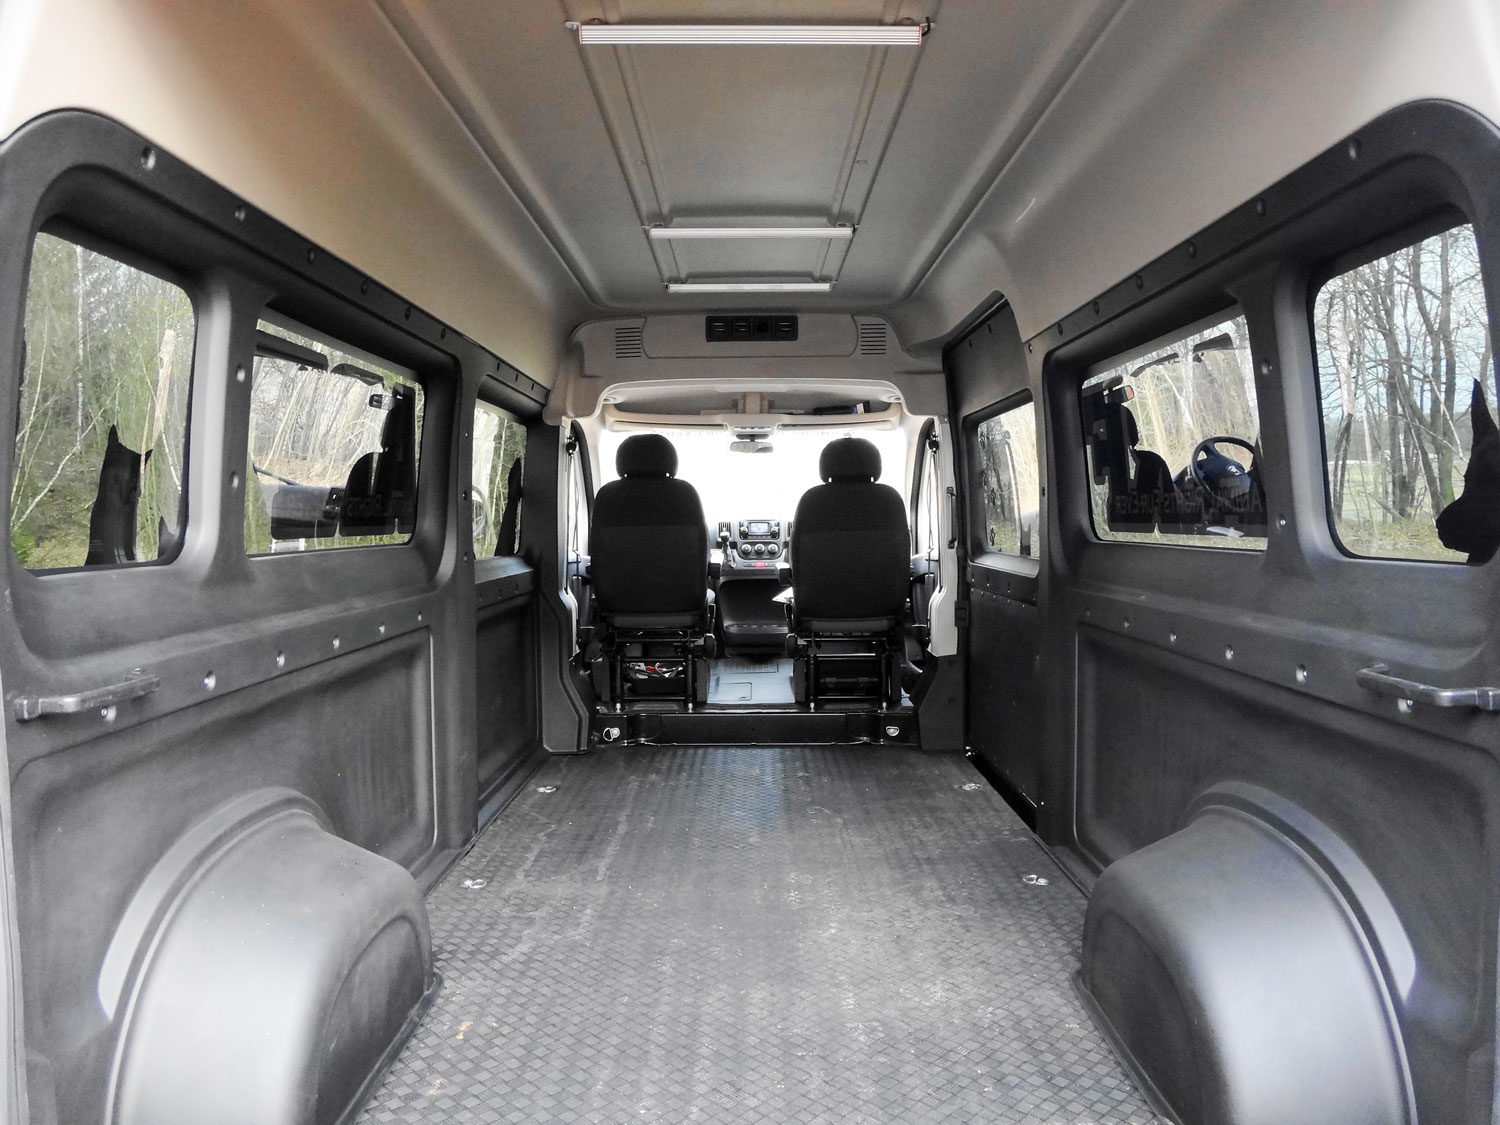 Ram Promaster Rear Cargo Hvac Systems For Heating Cooling